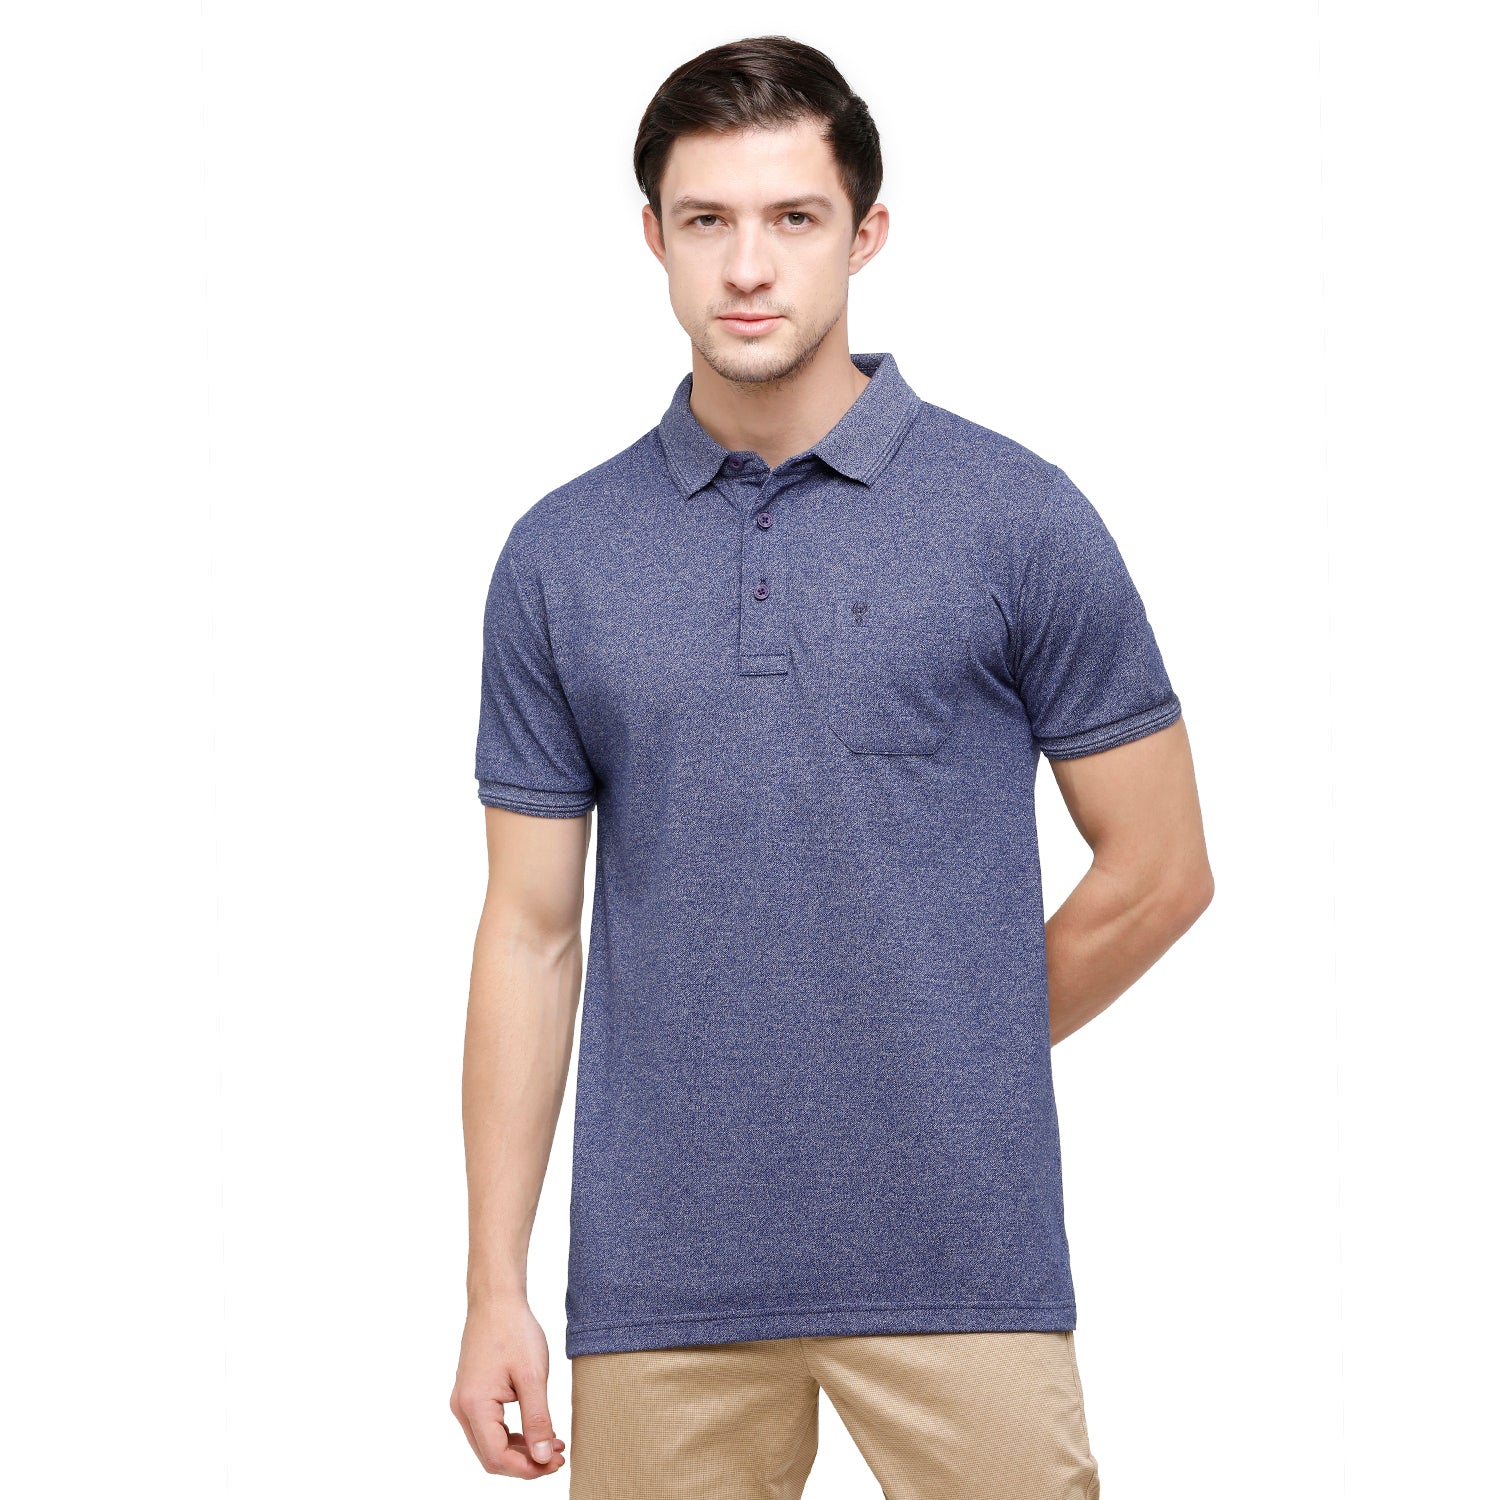 T-shirt Classic Polo Men's Navy Trendy Grindle Polo Half Sleeve Slim Fit T-Shirt | Proten - Navy